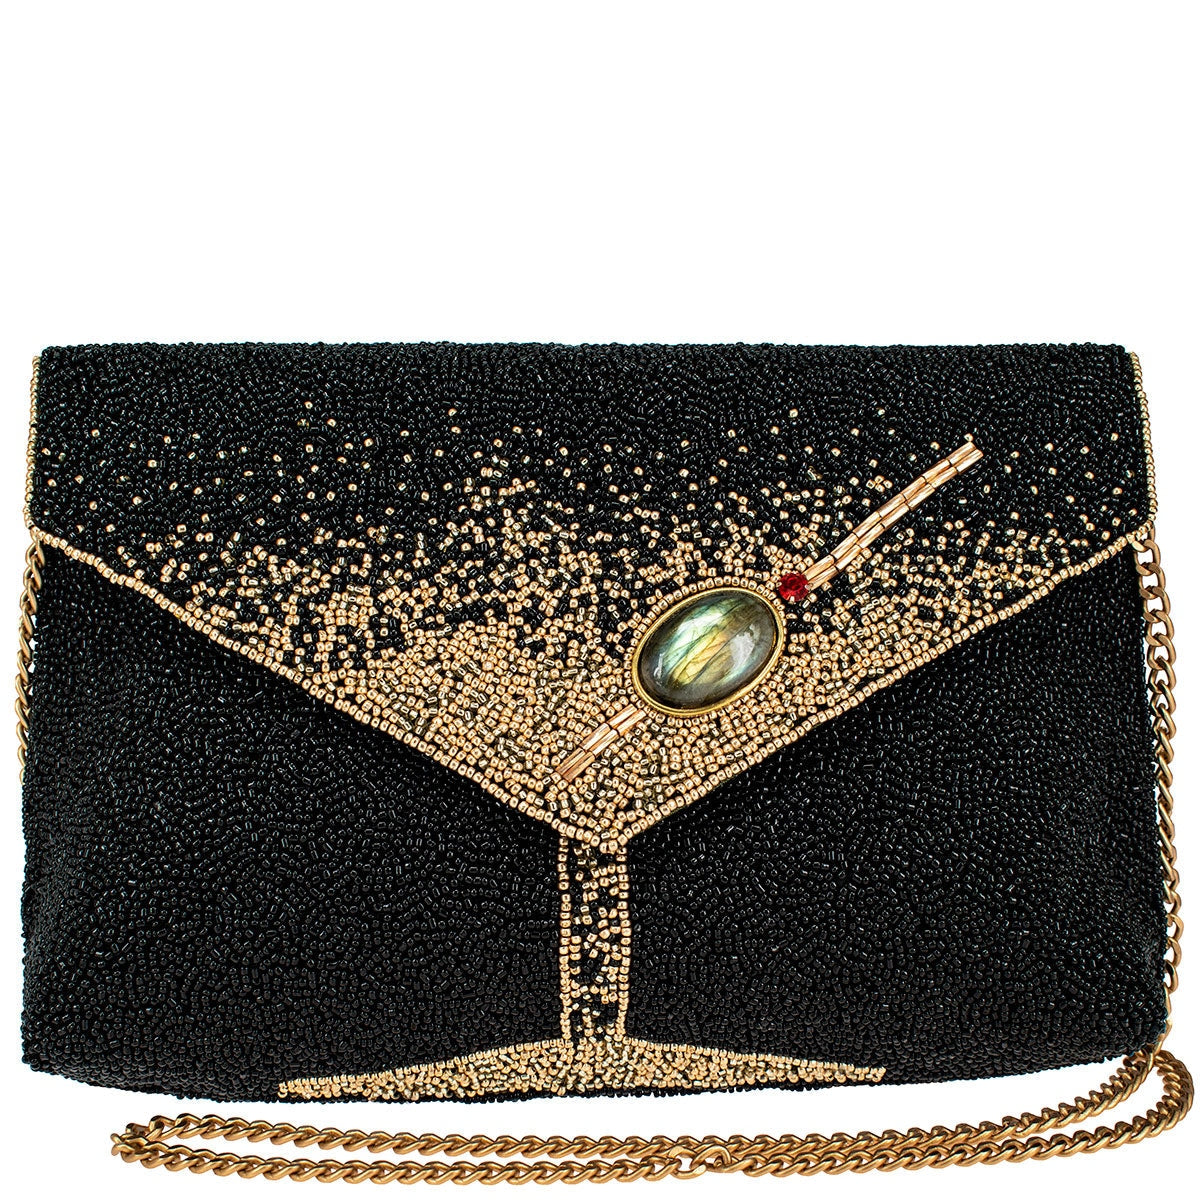 Designer Clutch Bags To Compliment You On Evening Parties